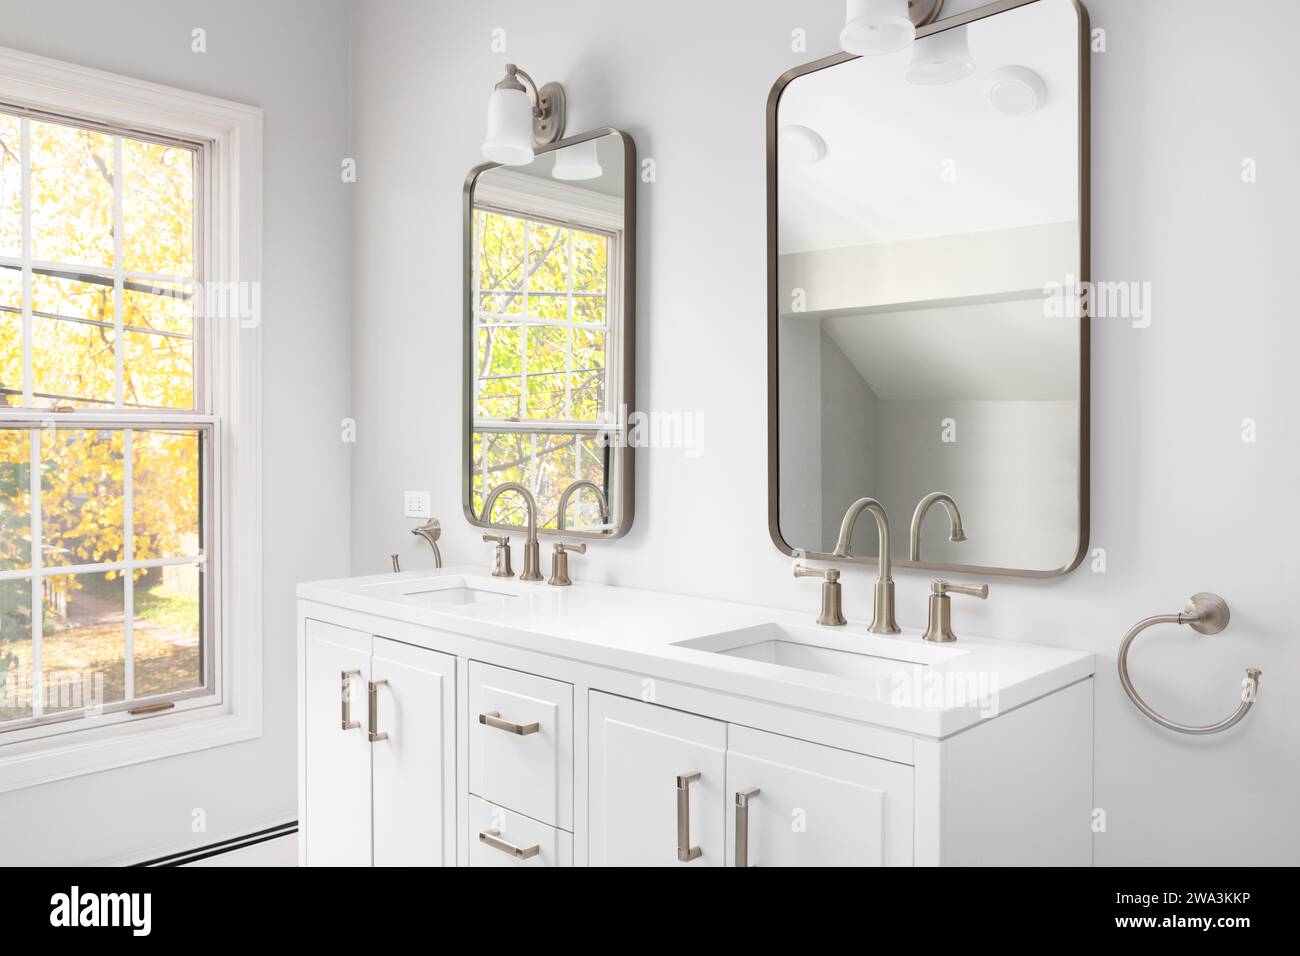 A bathroom detail with a white cabinet, bronze faucets and mirrors, and colorful trees out the windows. Stock Photo